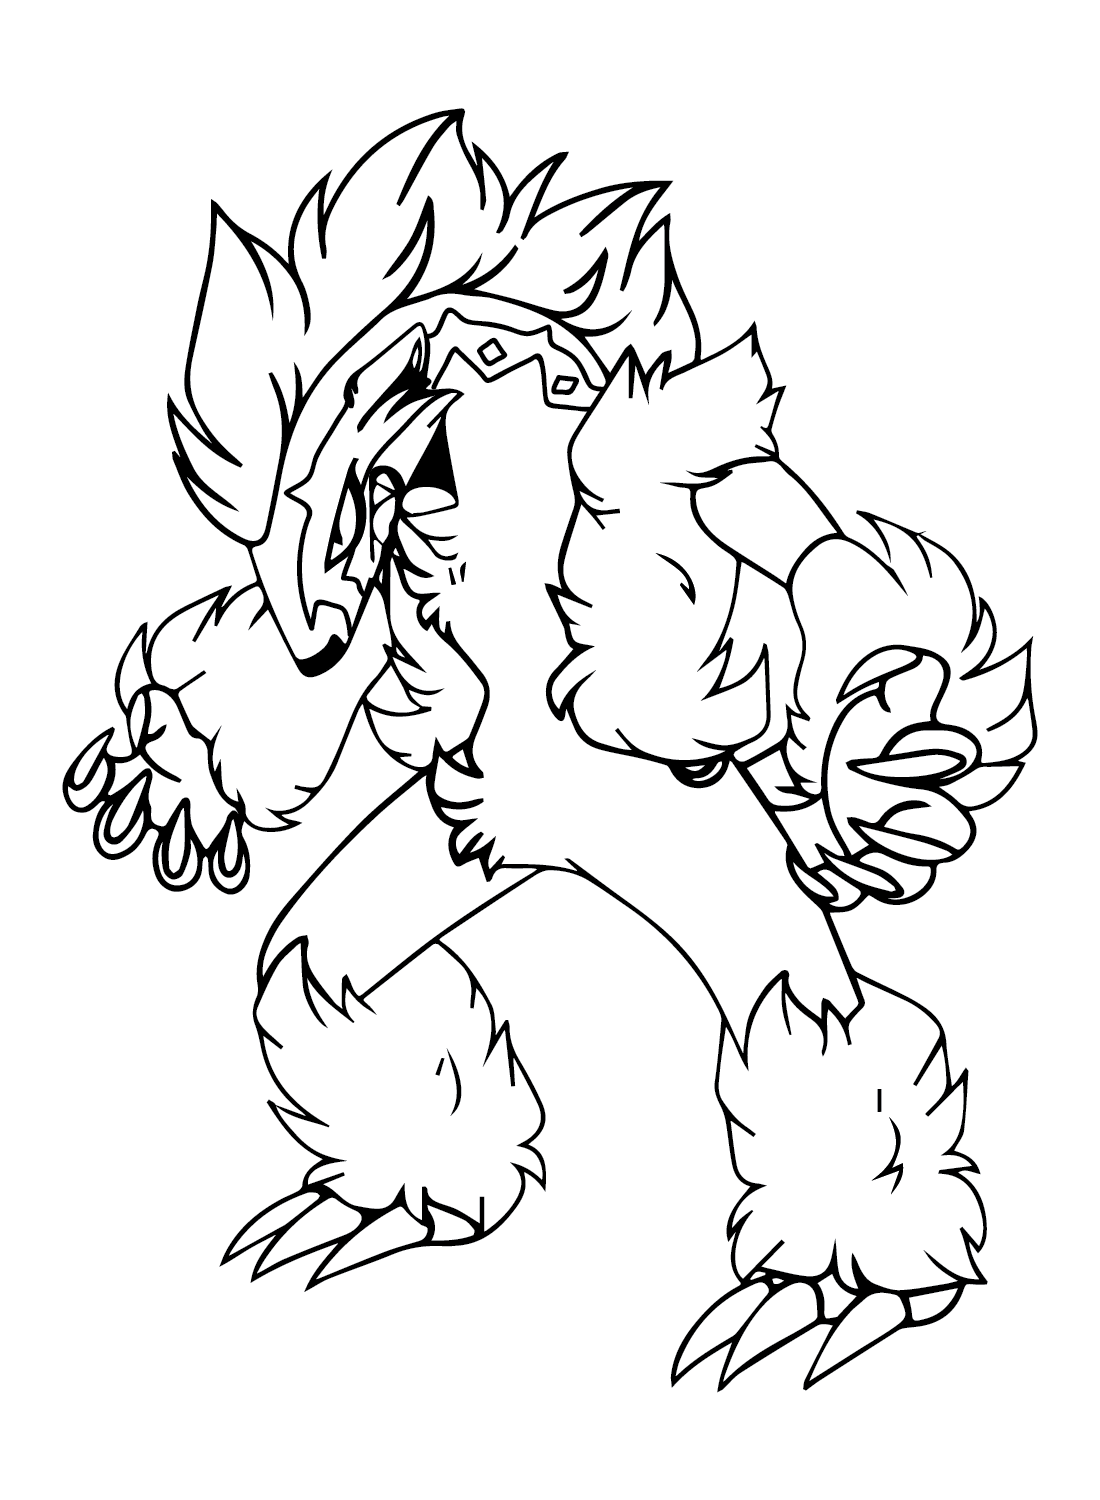 Obstagoon Pictures Coloring Page